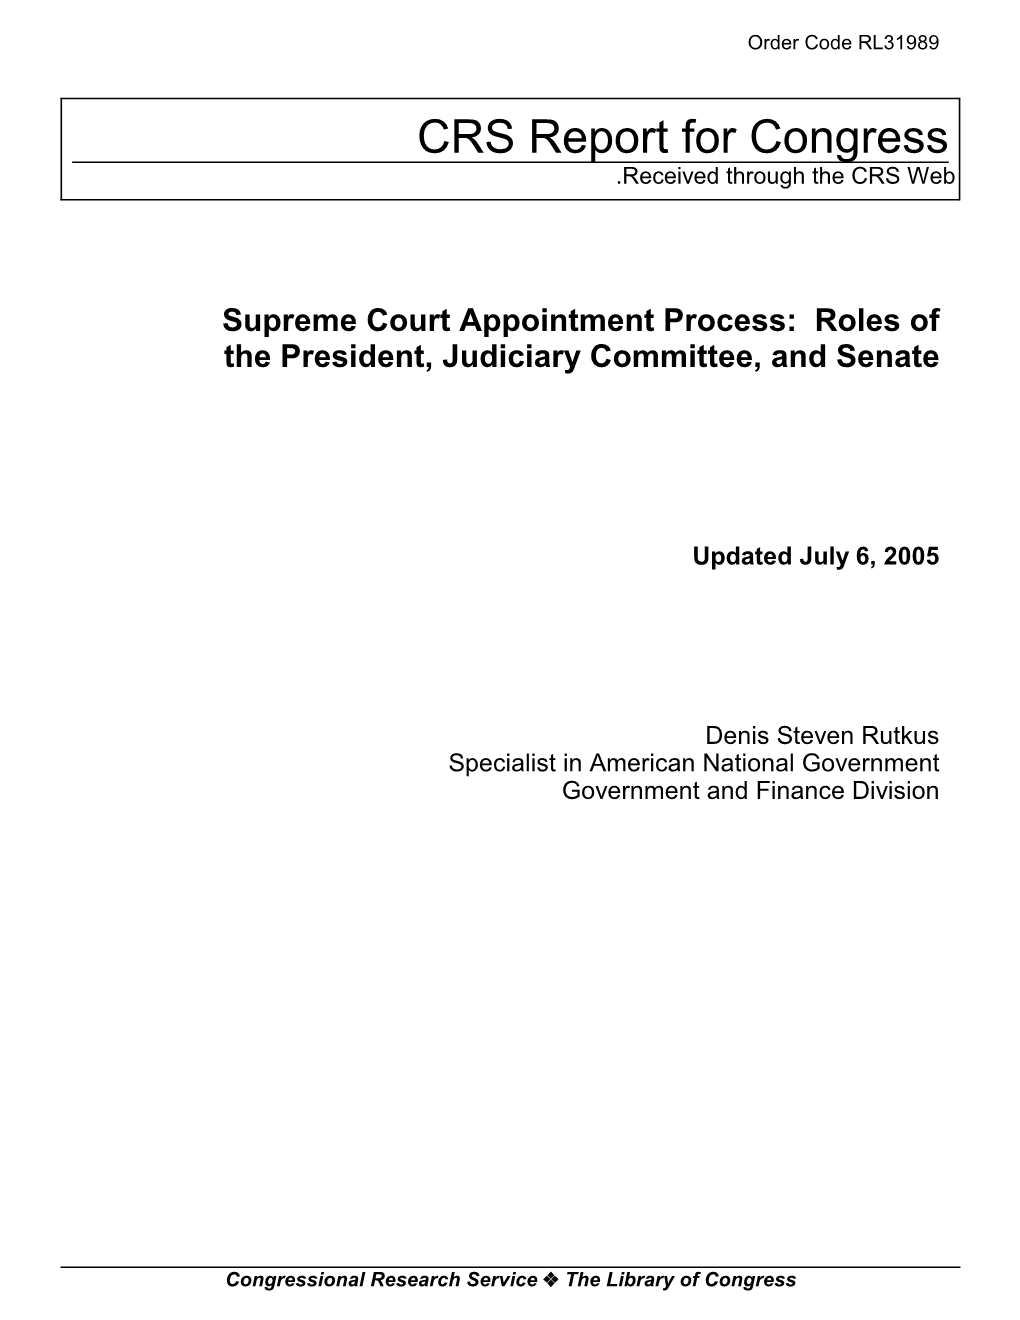 Supreme Court Appointment Process: Roles of the President, Judiciary Committee, and Senate